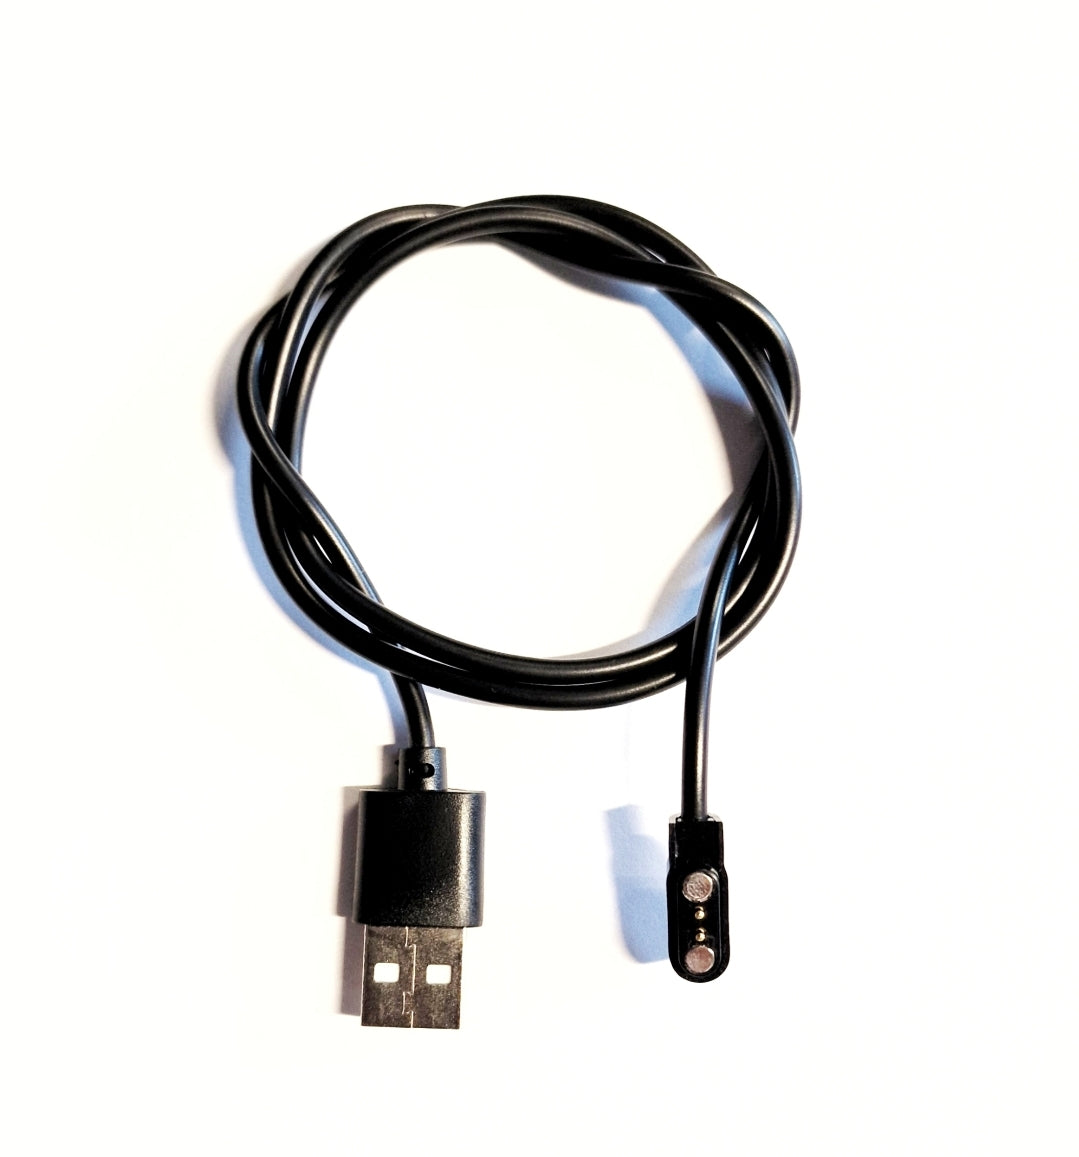 Spintso S1 USB Charger Cable